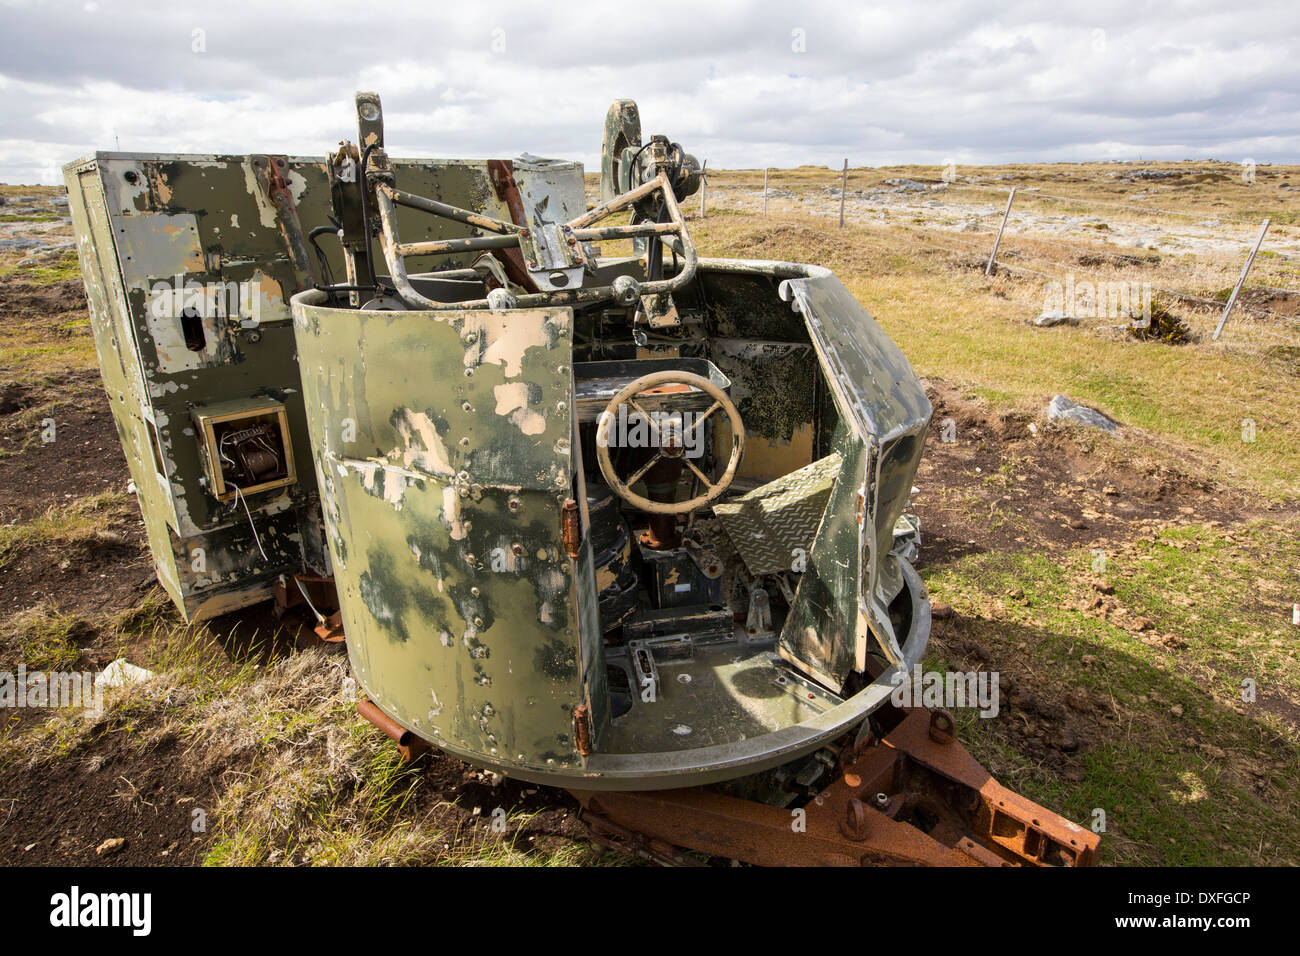 A left over artillery battery from the Falklands conflict on the outskirts of Port Stanley, Falkland Islands. Stock Photo